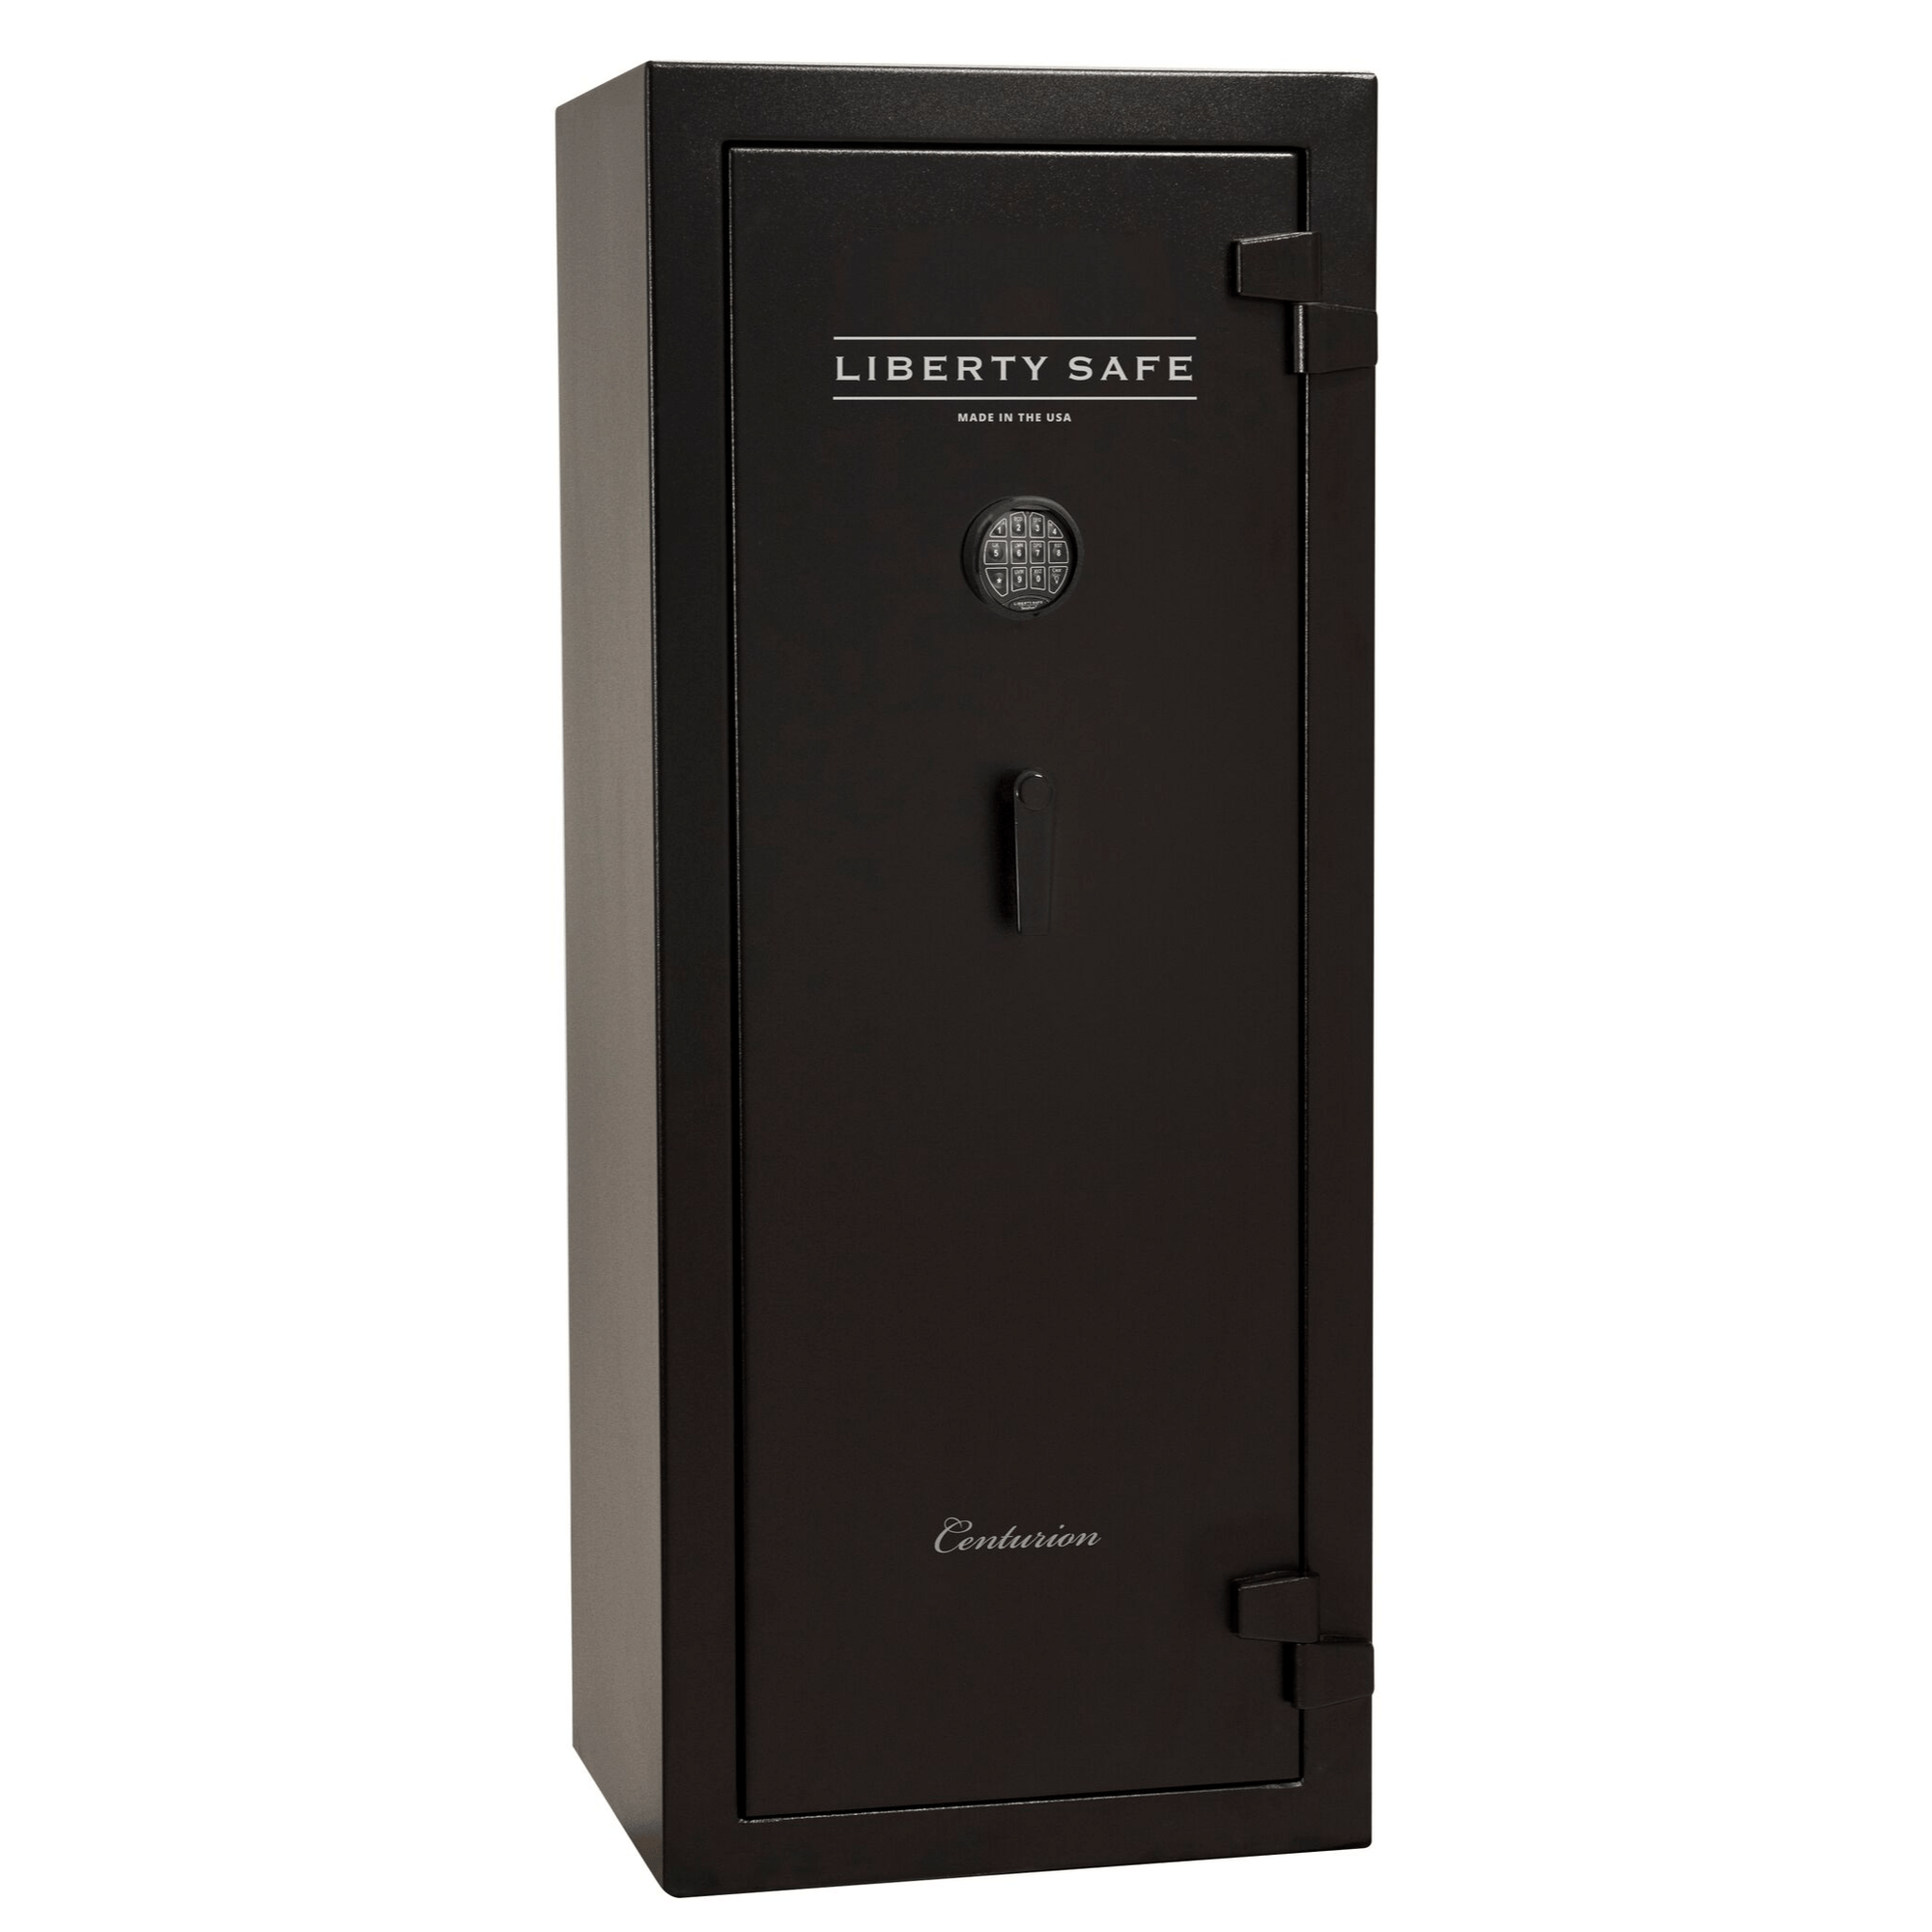 Centurion 18 | Level 1 Security | 30 Minute Fire Protection | Liberty Safe Norcal.